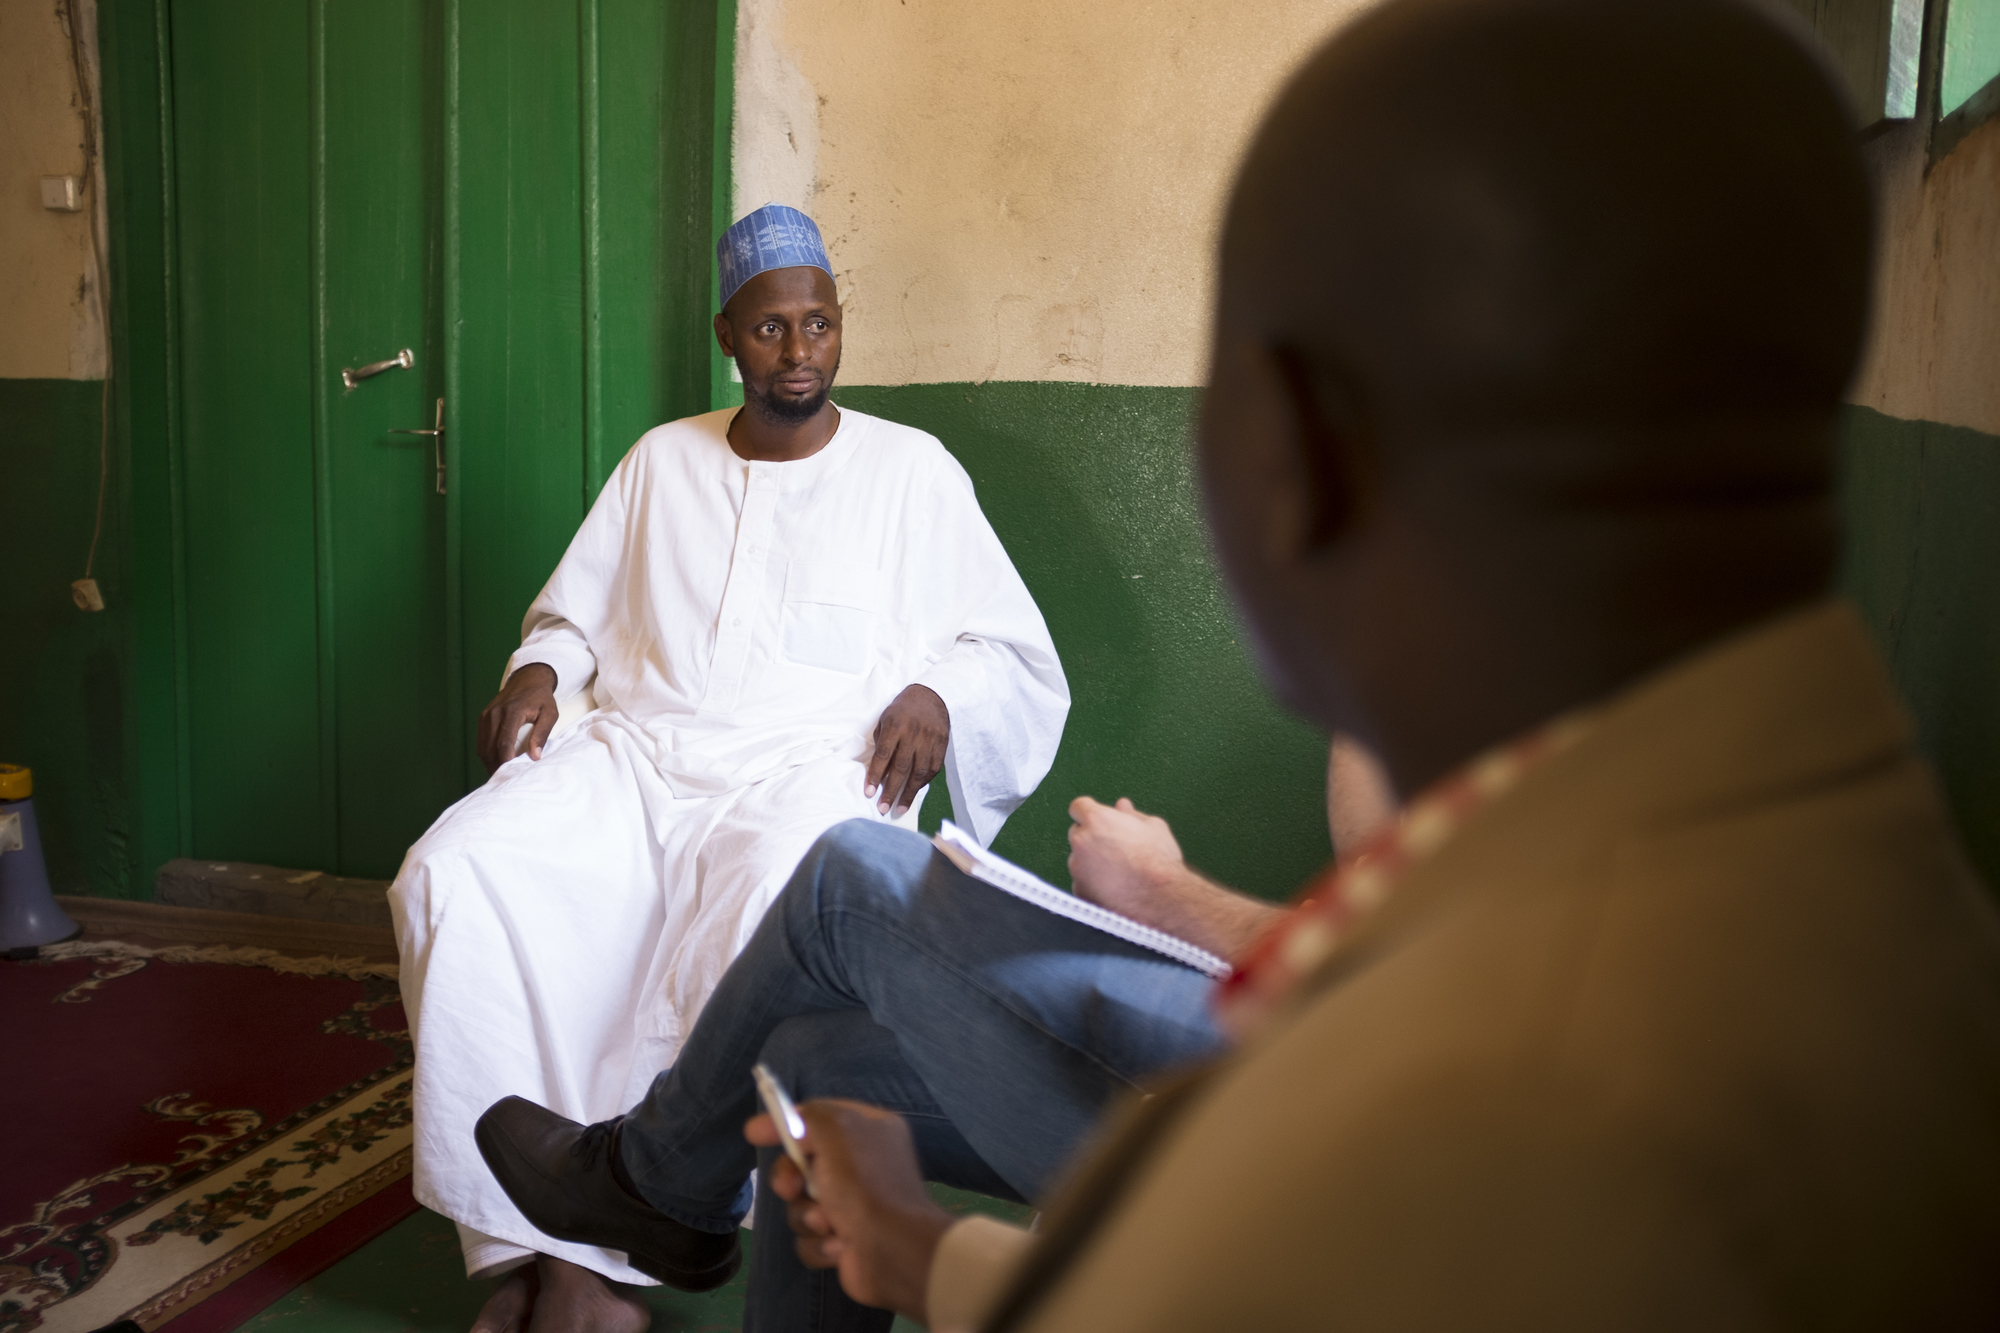 The Central African Republic’s faith leaders are the country’s best hope for peace